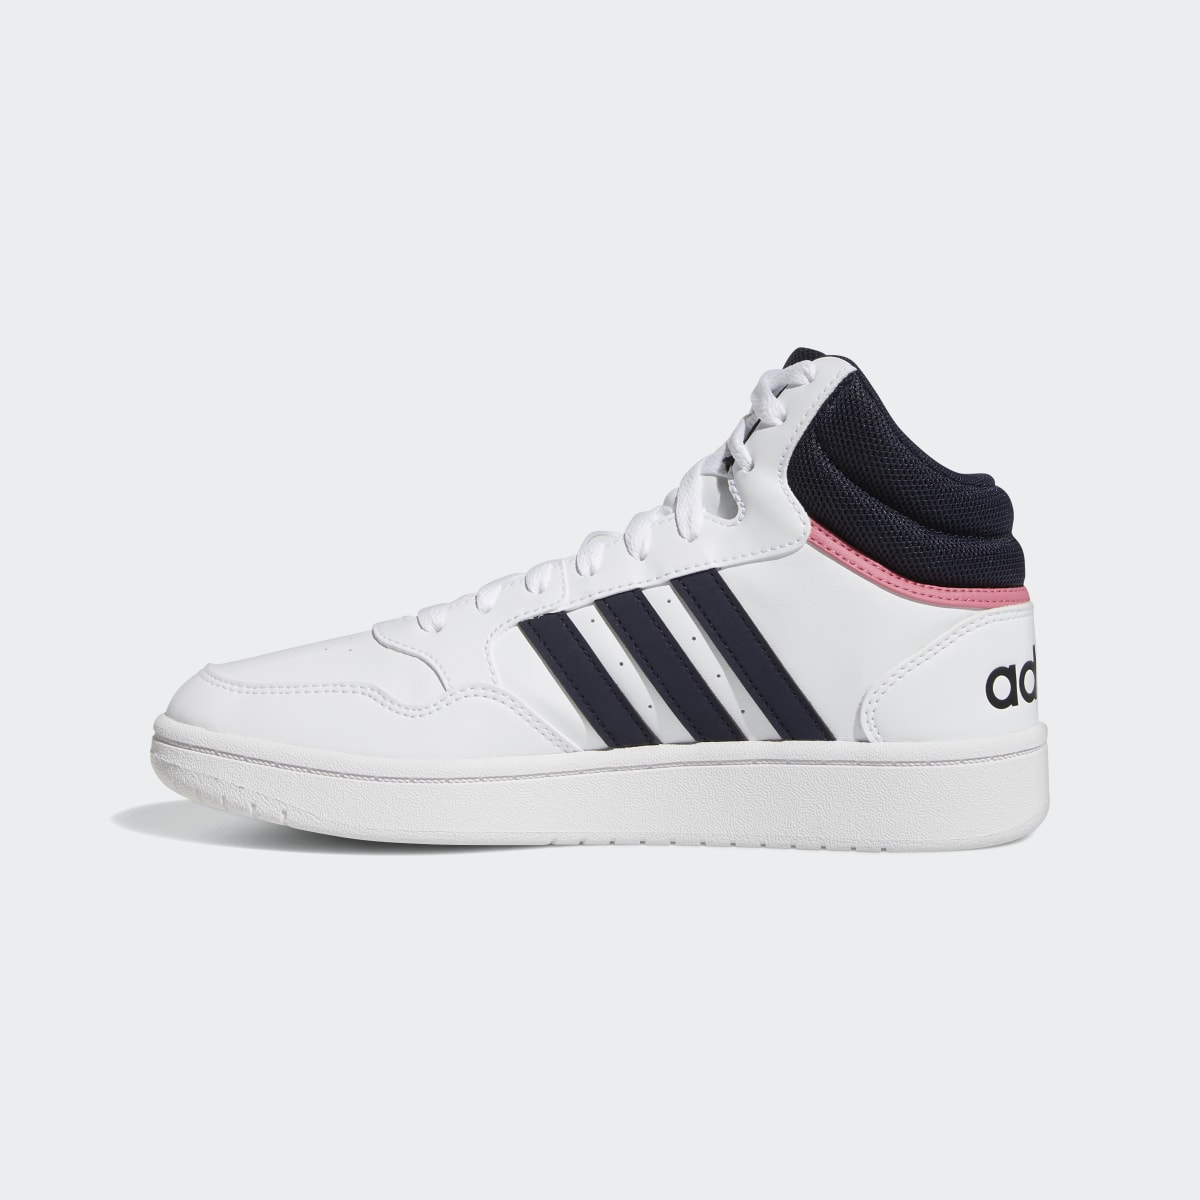 Adidas Hoops 3.0 Mid Classic Shoes. 7